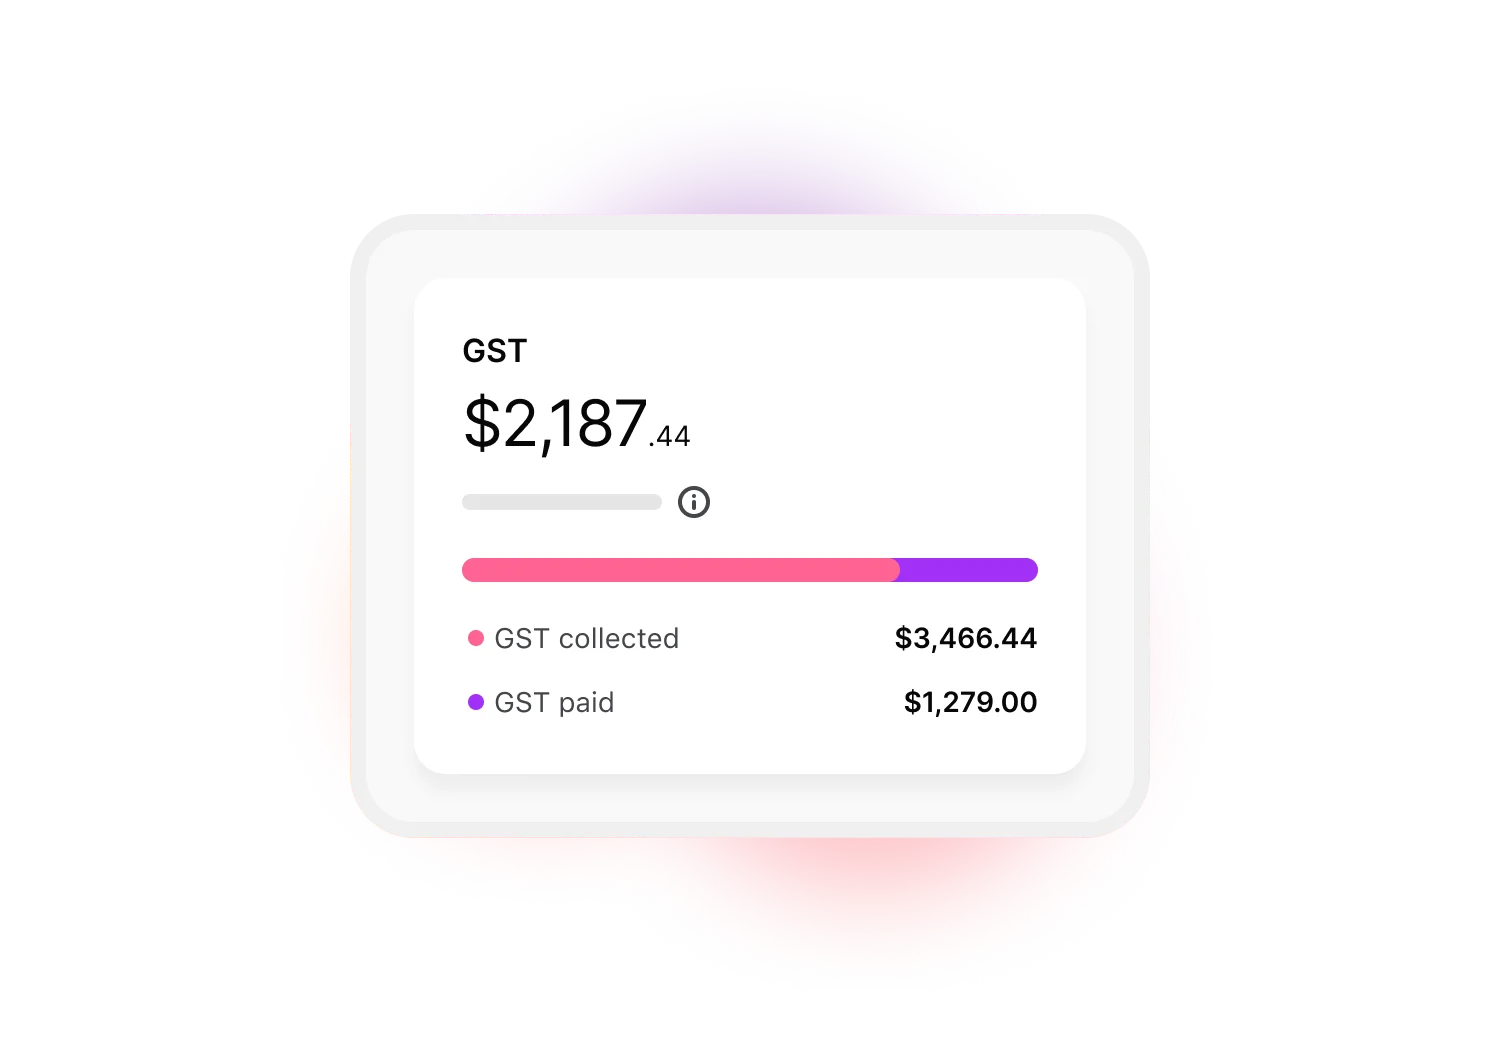 Example of the GST report available on your dashboard in MYOB Business. You can easily see the GST collected verus paid.